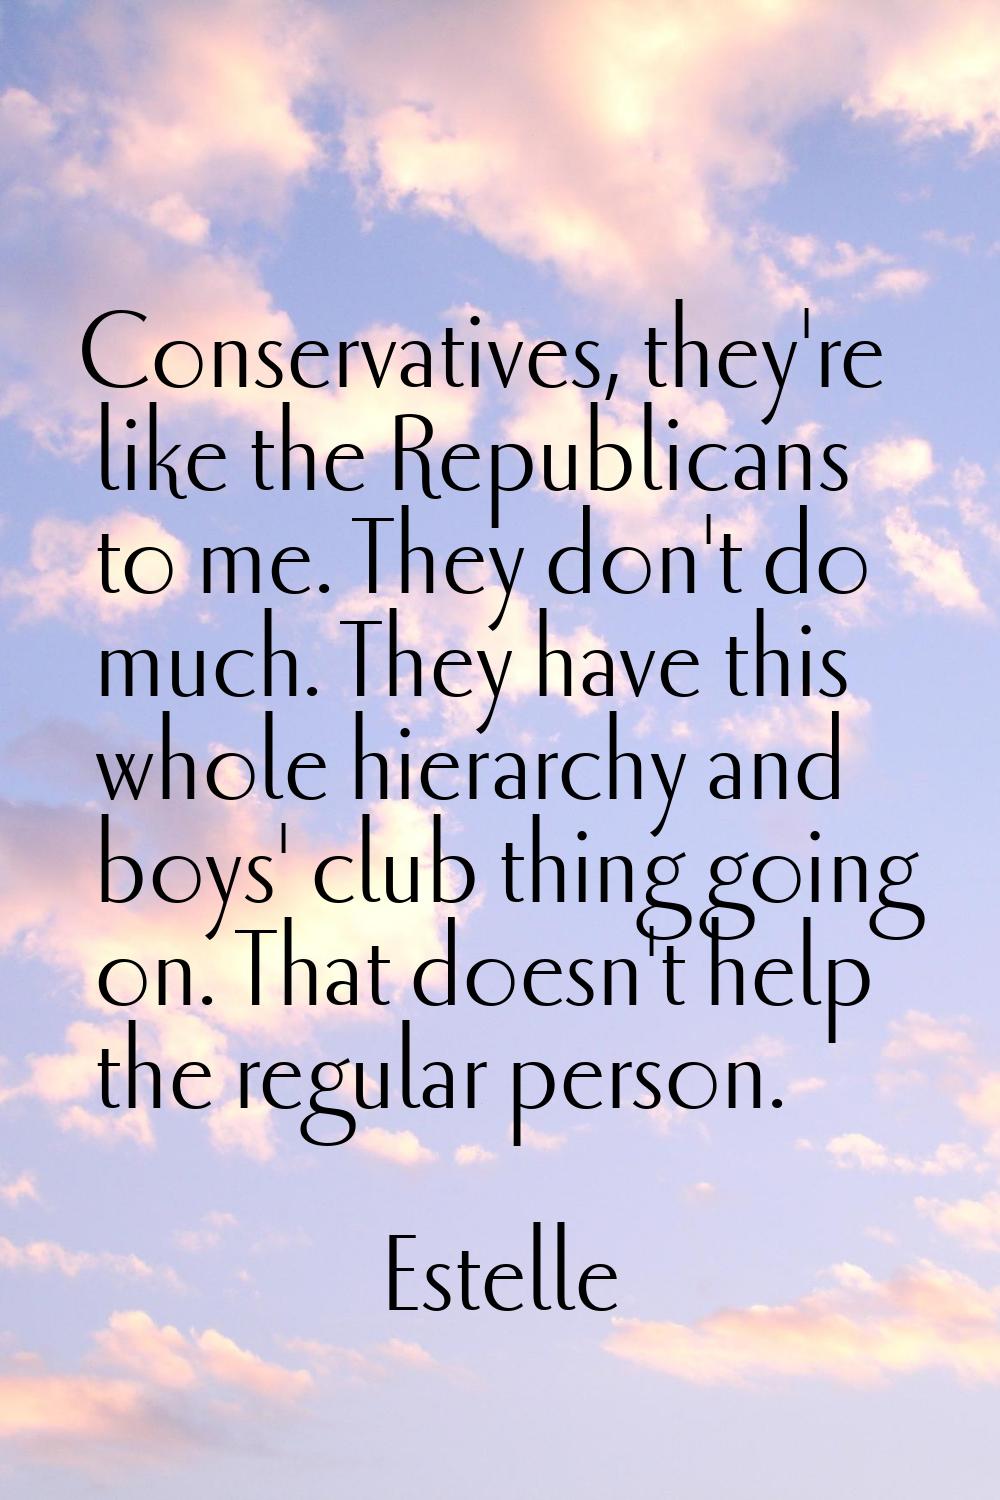 Conservatives, they're like the Republicans to me. They don't do much. They have this whole hierarc